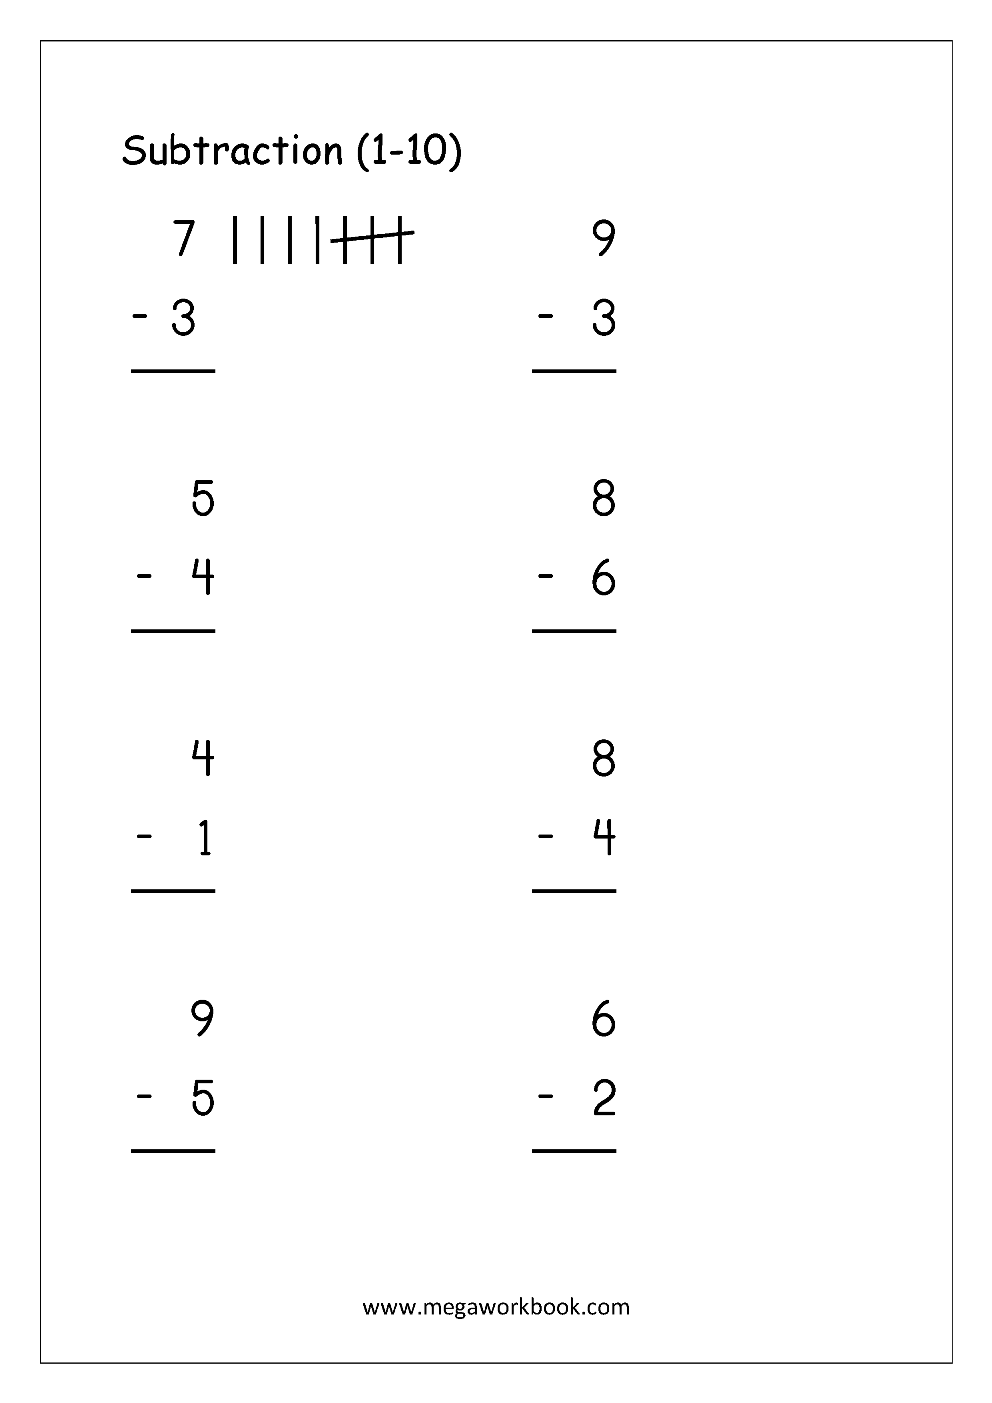 free printable number subtraction 1 10 worksheets for grade 1 and kindergarten subtraction with pictures objects to cross out subtraction using number line megaworkbook